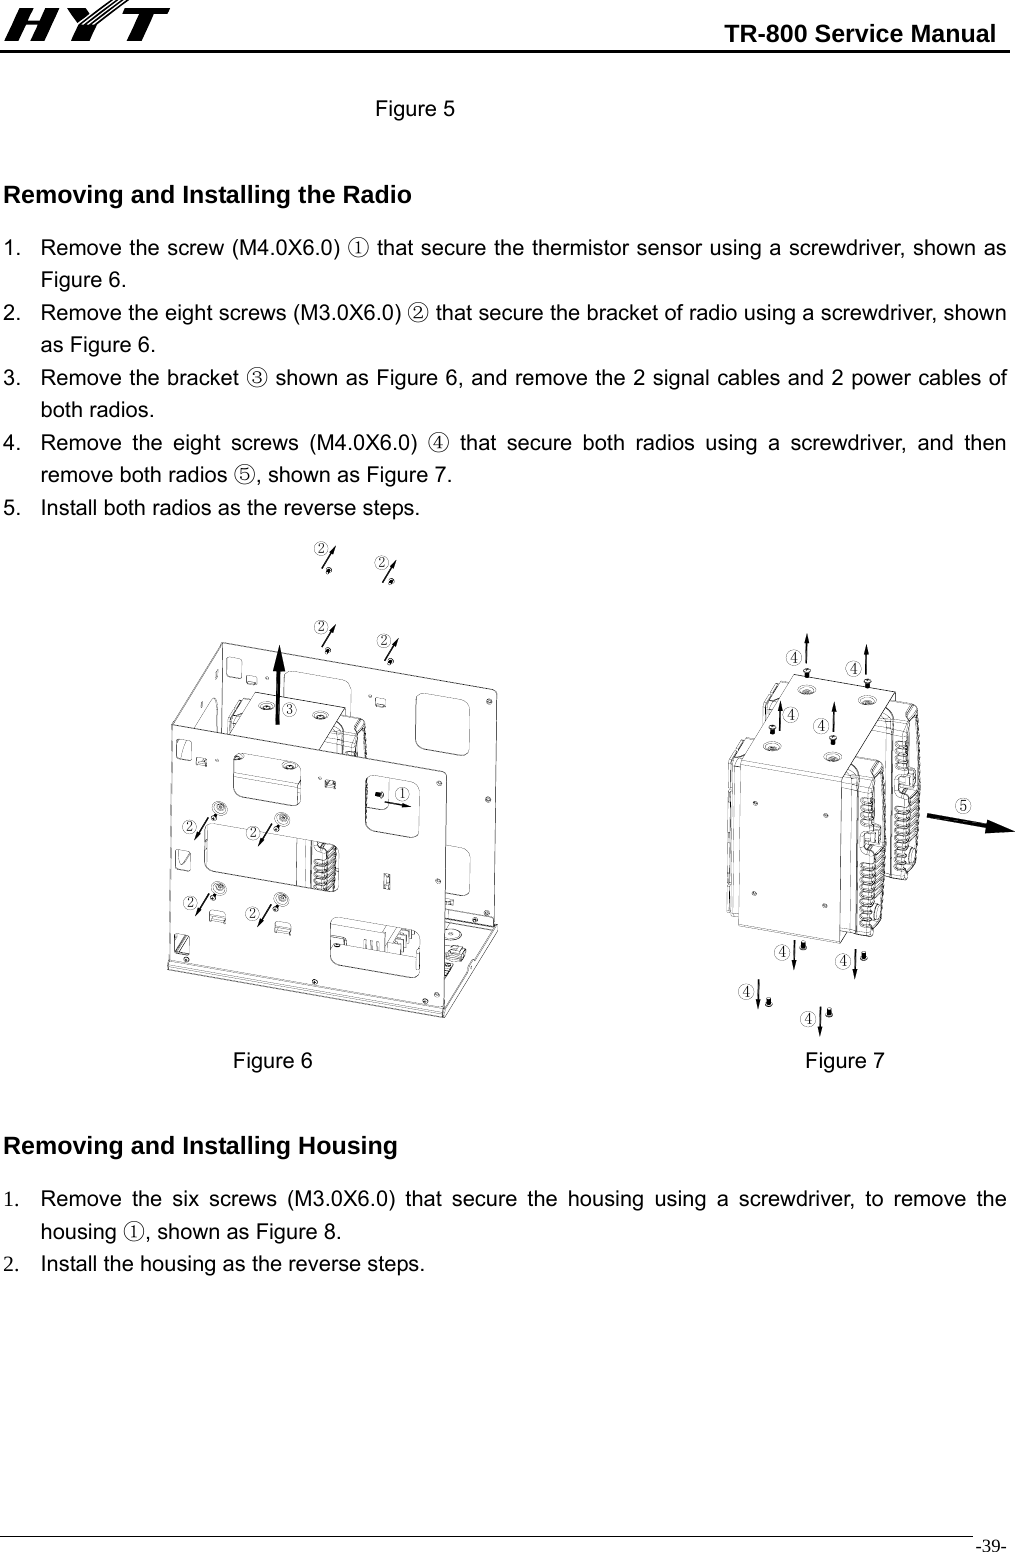                                                            TR-800 Service Manual  -39-                                   Figure 5  Removing and Installing the Radio 1.  Remove the screw (M4.0X6.0)   that secure the ①thermistor sensor using a screwdriver, shown as Figure 6. 2.  Remove the eight screws (M3.0X6.0)   that secure the bracket of radio using a screwdriver, shown ②as Figure 6.   3.  Remove the bracket ③ shown as Figure 6, and remove the 2 signal cables and 2 power cables of both radios. 4.  Remove the eight screws (M4.0X6.0)   that secure both radios using a screwdriver, and then ④remove both radios  , shown as Figure 7.⑤ 5.  Install both radios as the reverse steps.                                        Figure 6                                             Figure 7  Removing and Installing Housing 1.  Remove the six screws (M3.0X6.0) that secure the housing using a screwdriver, to remove the housing ①, shown as Figure 8.   2.  Install the housing as the reverse steps.        3122222222544444444